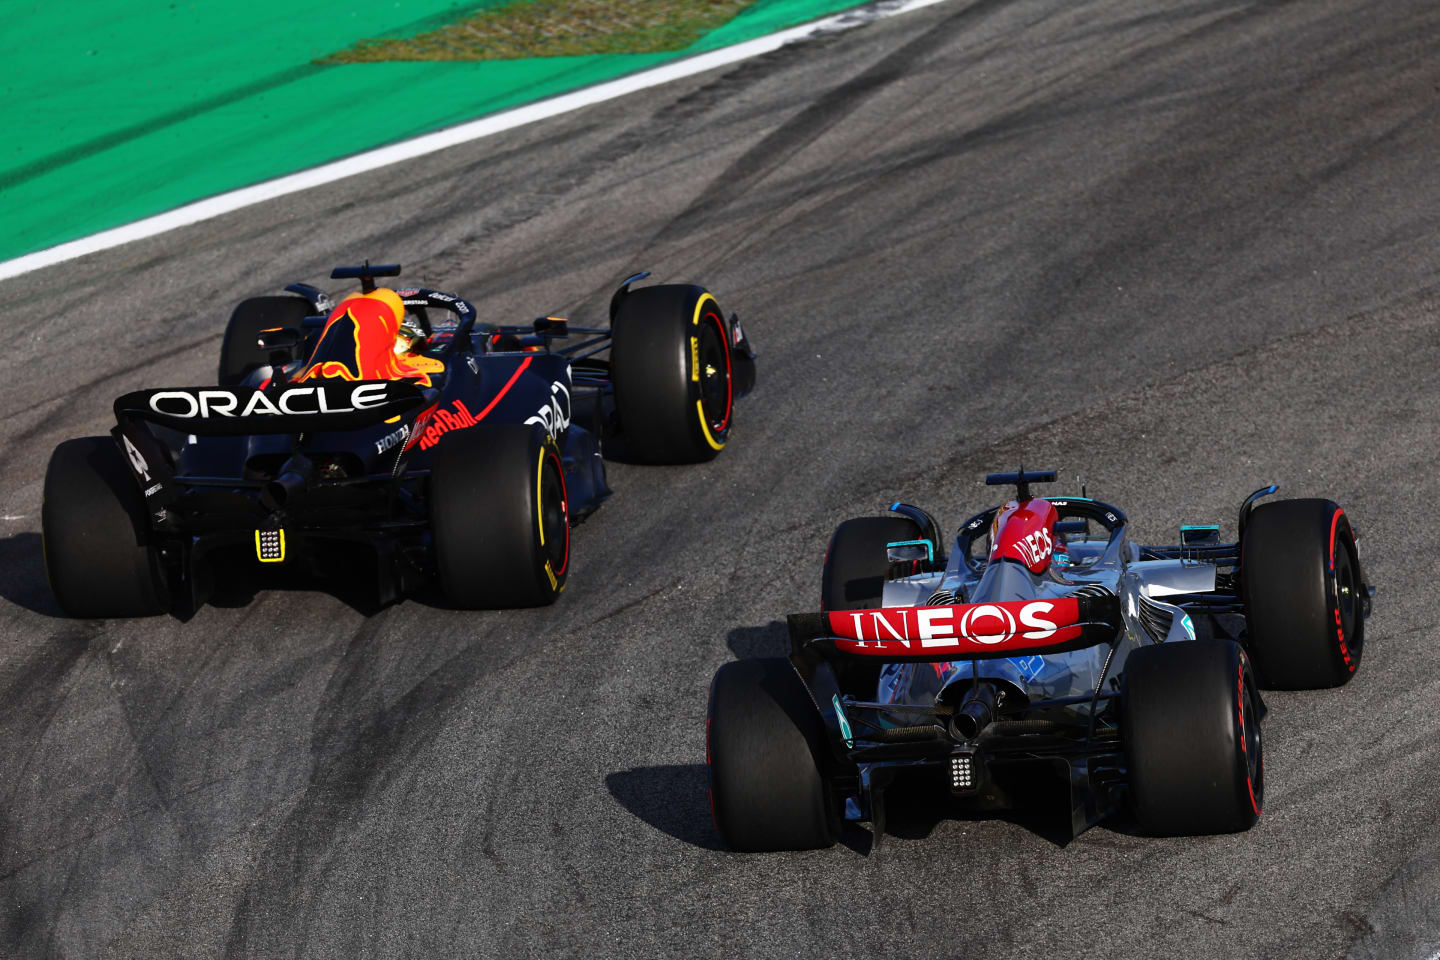 SAO PAULO, BRAZIL - NOVEMBER 12: Max Verstappen of the Netherlands driving the (1) Oracle Red Bull